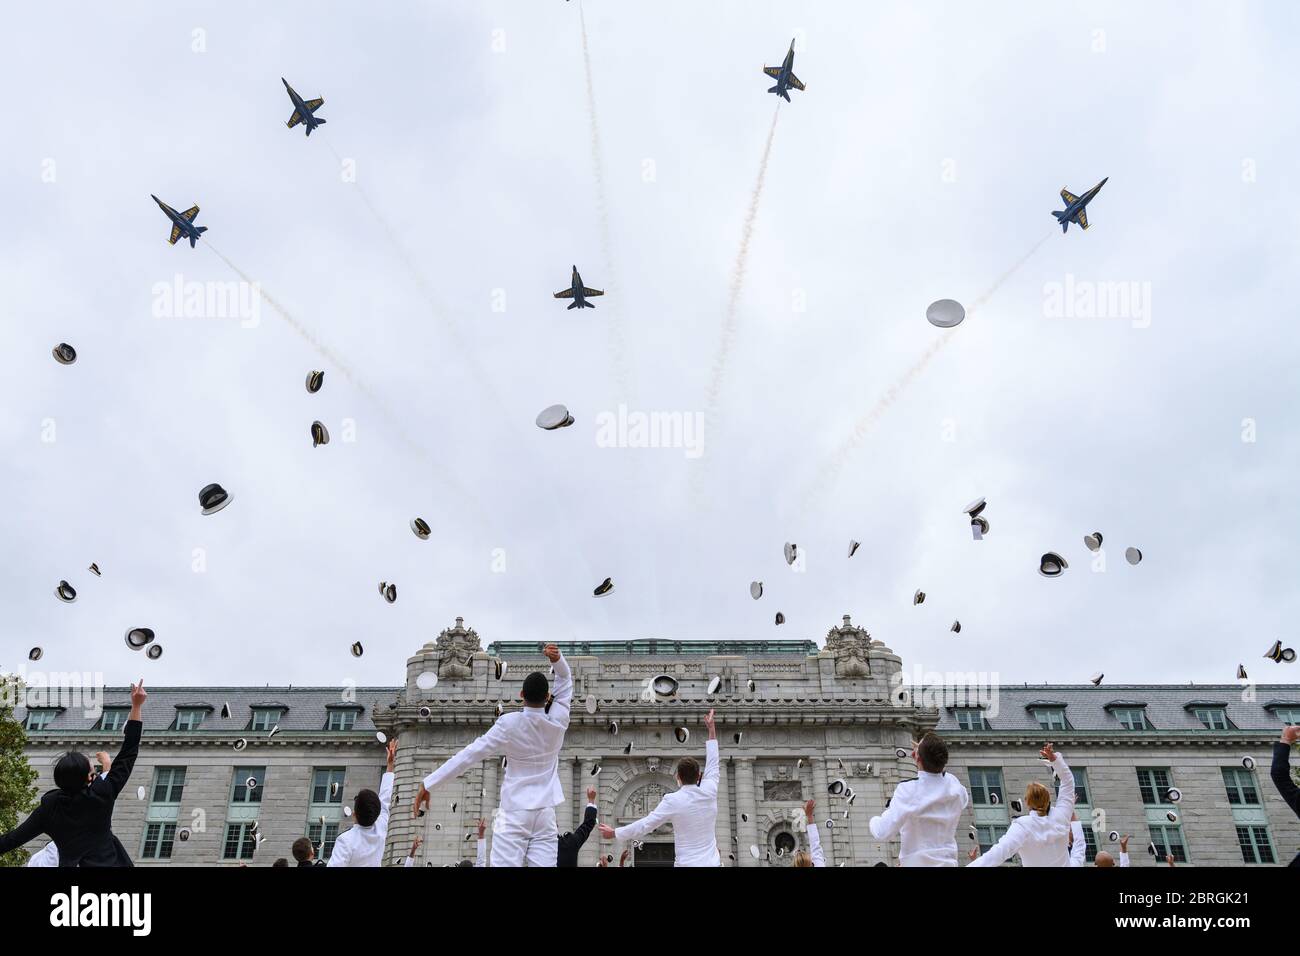 Annapolis, United States Of America. 20th May, 2020. Annapolis, United States of America. 20 May, 2020. The U.S. Navy Flight Demonstration Squadron, the Blue Angels, fly over Bancroft Hall as midshipmen toss their hats concluding the fifth swearing-in event for the Naval Academy Class of 2020 under COVID-19, coronavirus pandemic social distancing rules May 20, 2020 in Annapolis, Maryland. Approximately 1,000 midshipmen will graduate and be sworn-in during five events and one virtual ceremony. Credit: Dana Legg/DOD Photo/Alamy Live News Stock Photo